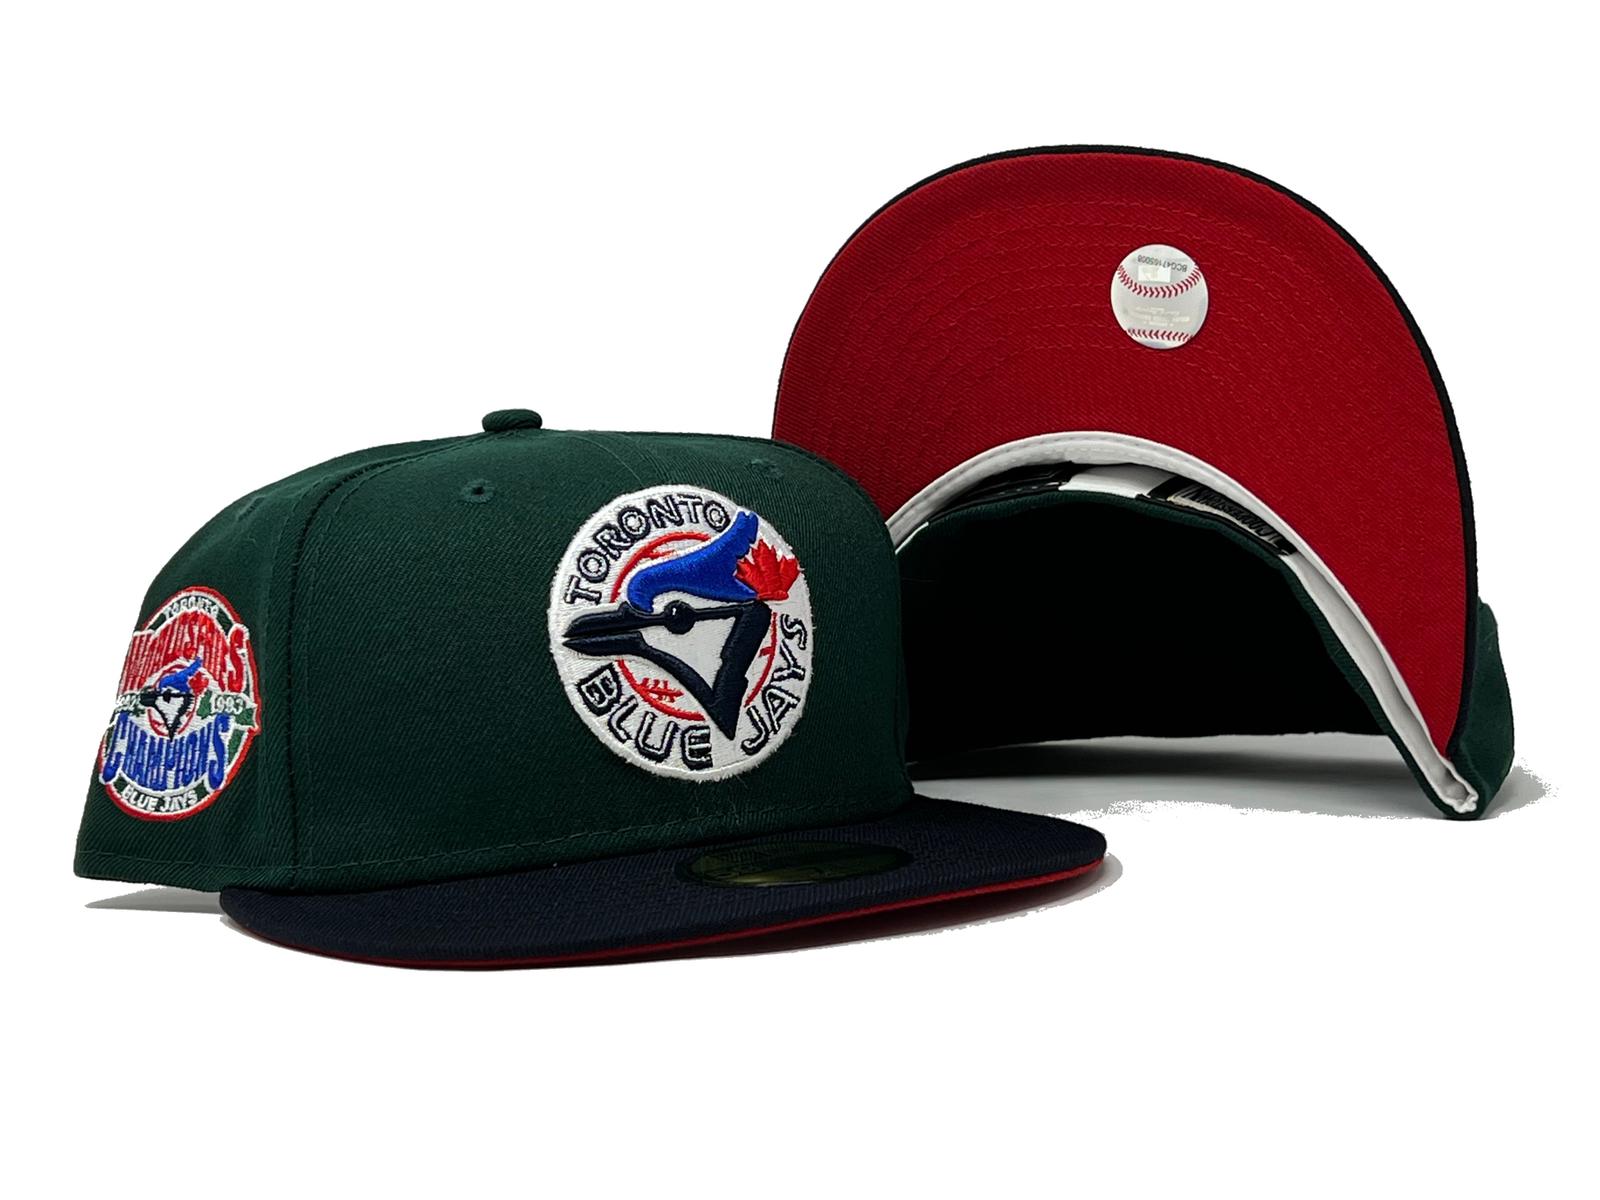 TORONTO BLUE JAYS 1992-93 WORLD SERIES CHAMPIONS GREEN DOME RED